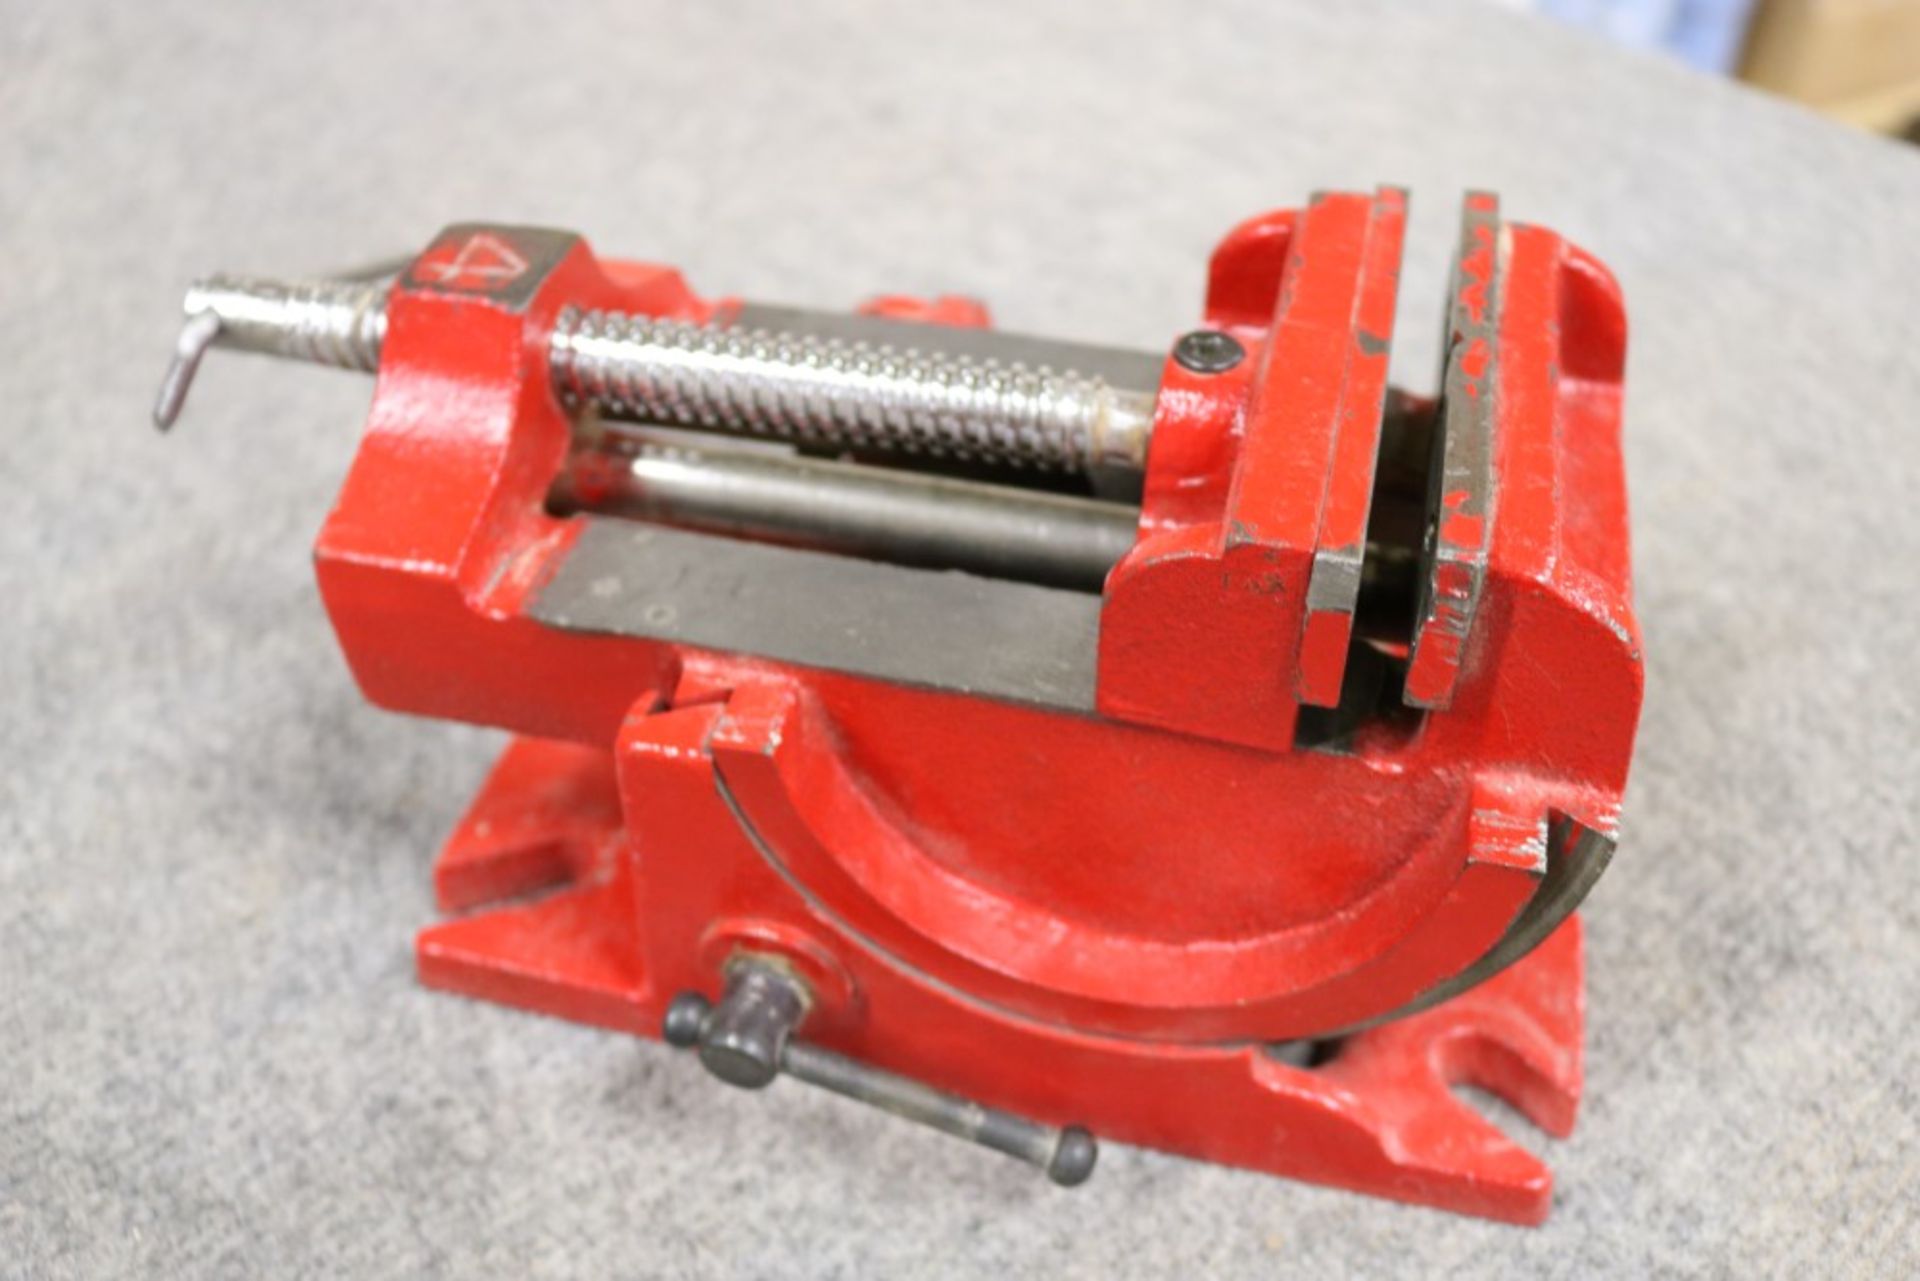 Wilton 10" Heavy Duty Vise and 4" Table Top 90 Degree Swivel Vise - Image 5 of 7